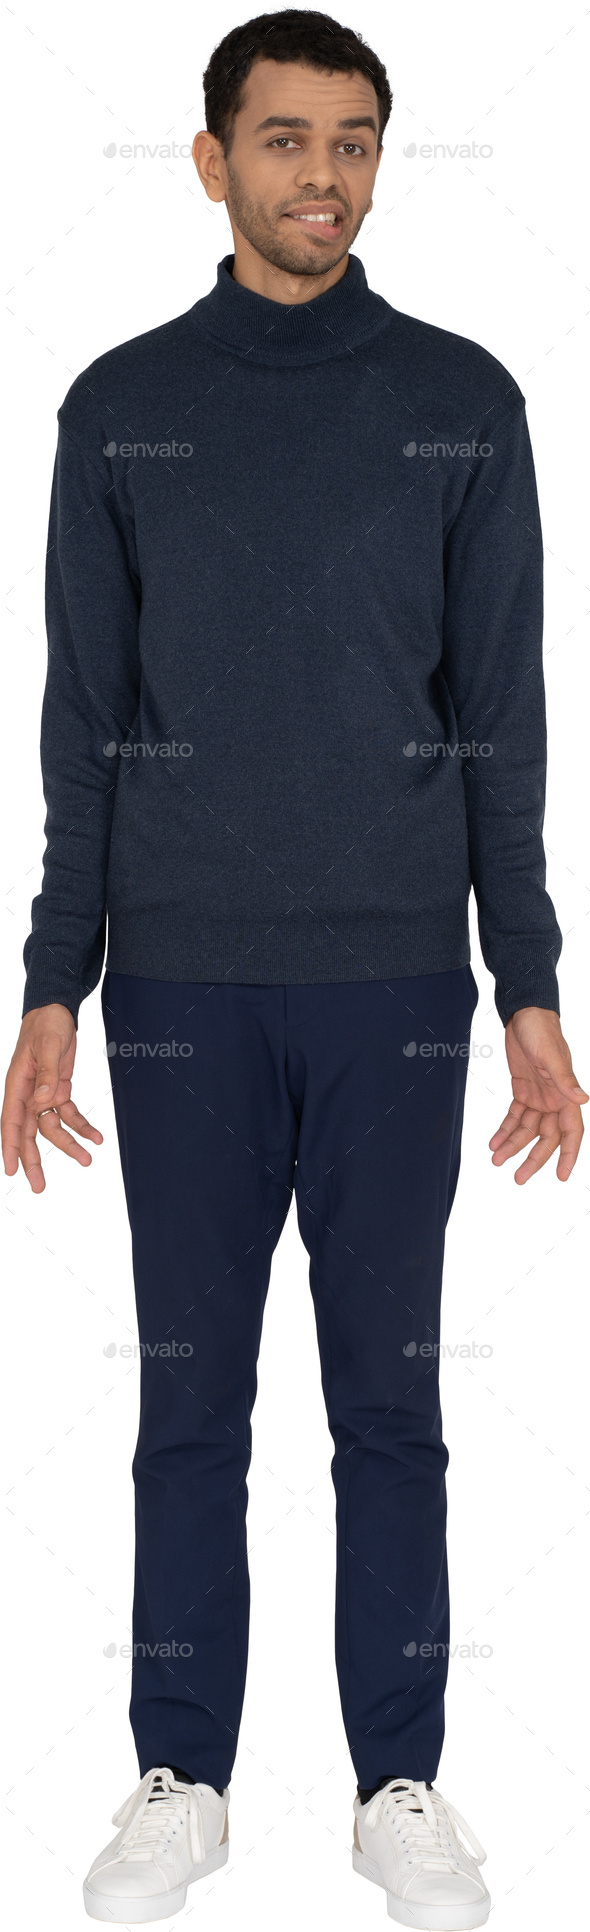 a man wearing a blue sweatshirt and blue pants with his hands out